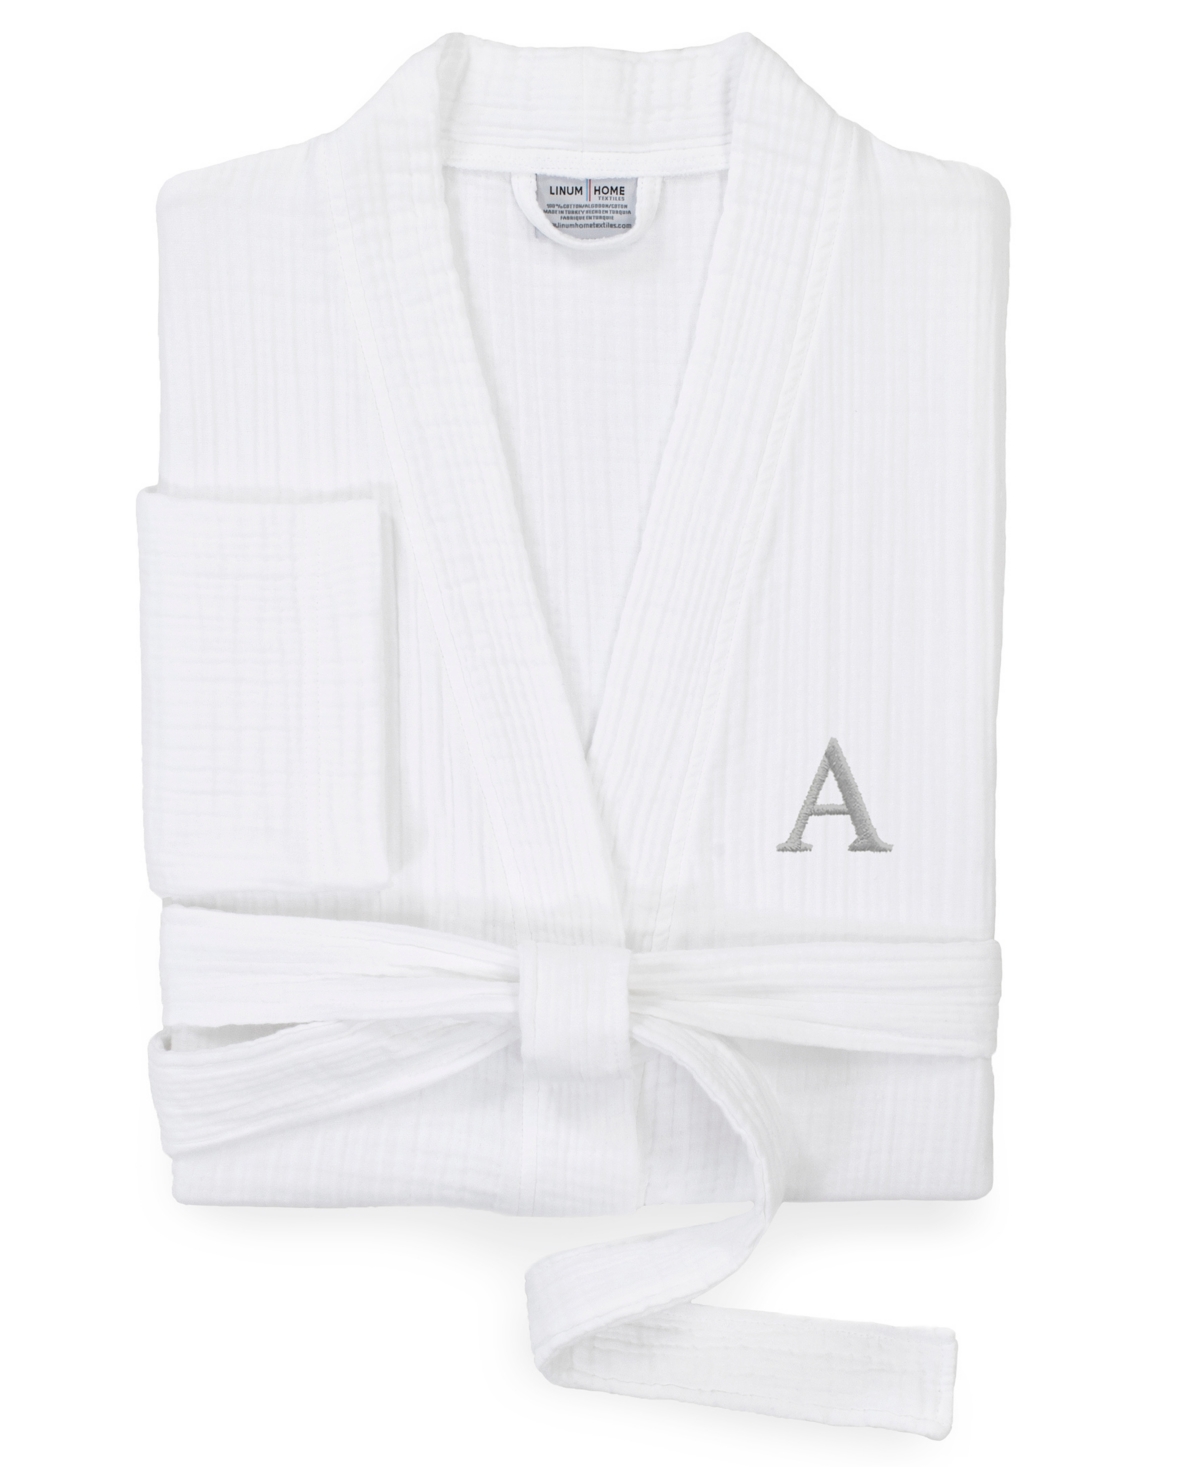 Linum Home Smyrna Personalized Hotel/Spa Luxury Robes Bedding